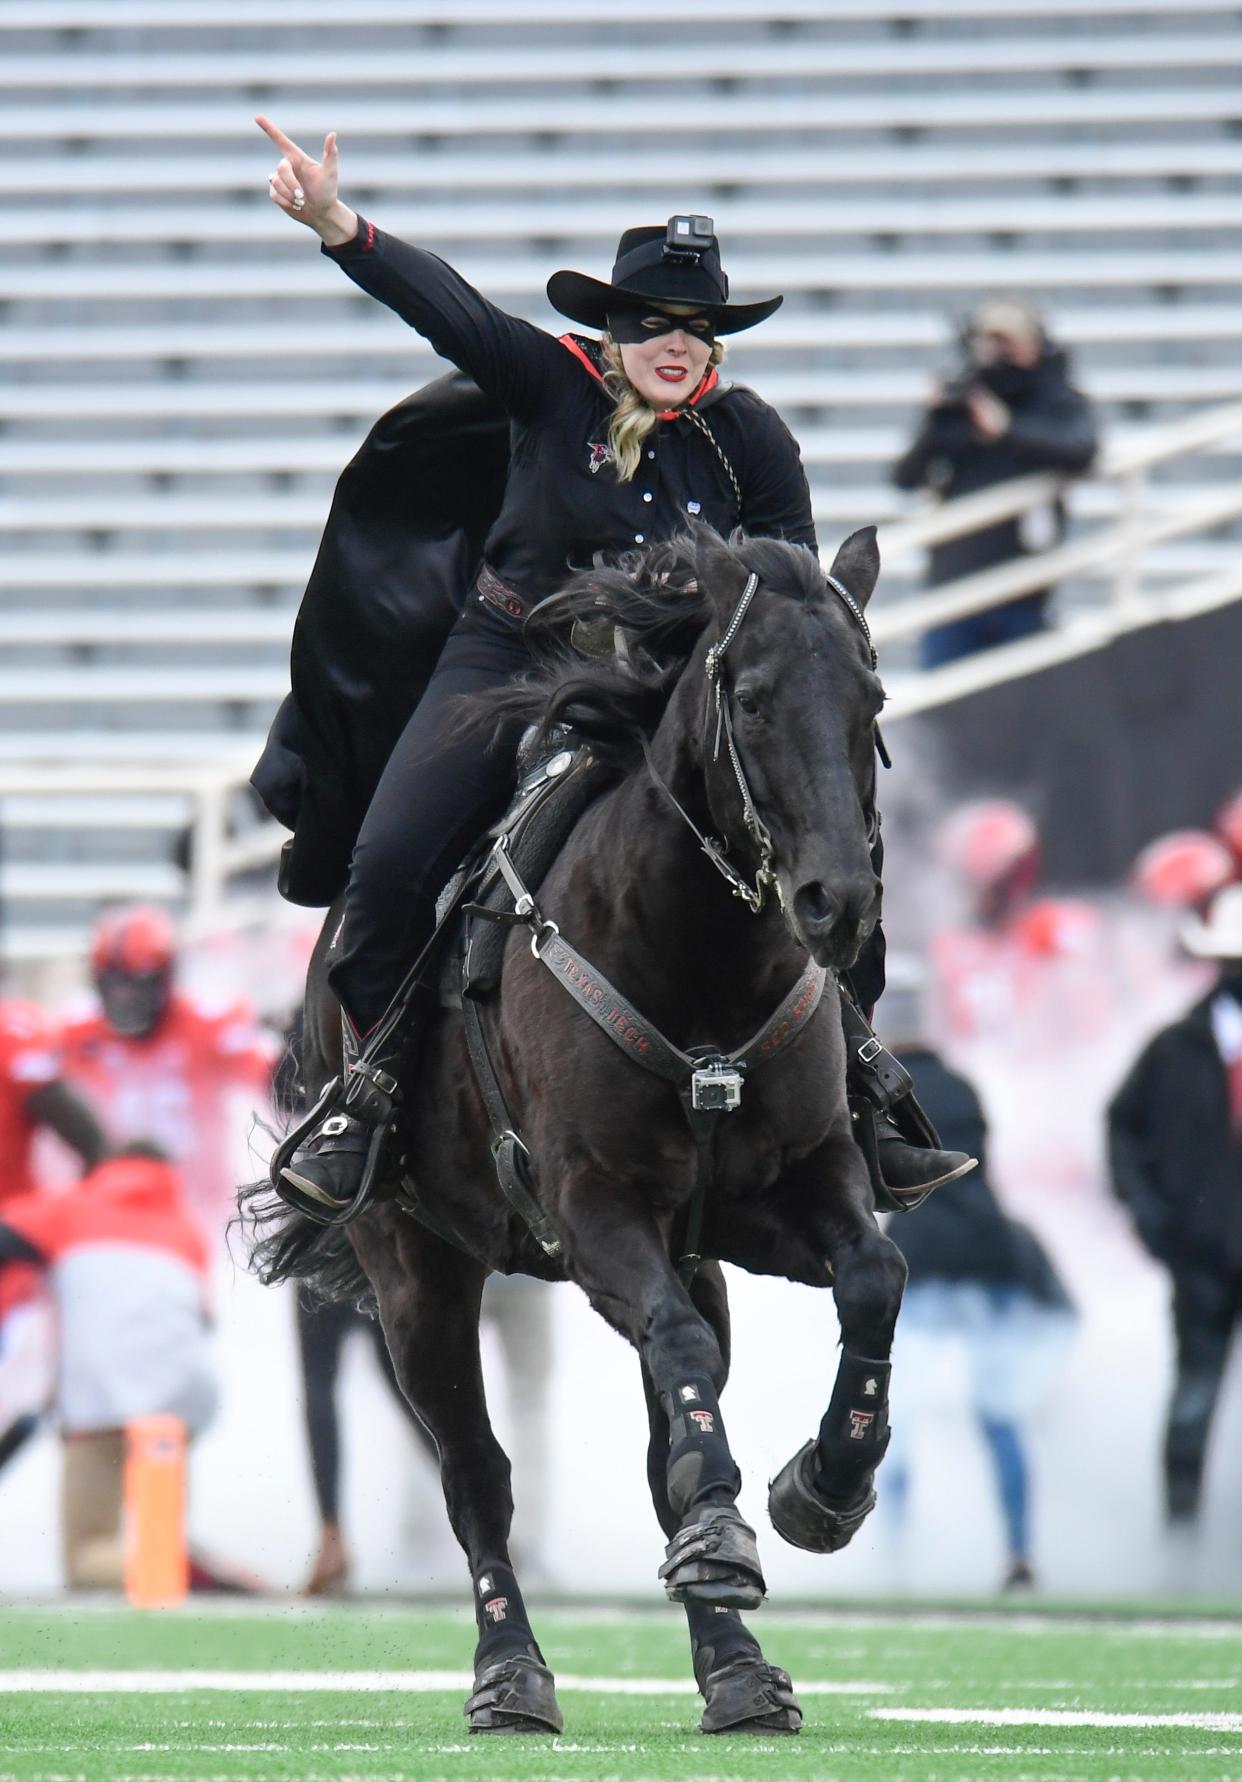 Texas Tech Masked Rider Cameron Hekkert ride out on Fearless Champion before Tech's game against Kansas Saturday, Dec. 5, 2020, at Jones AT&T Stadium in Lubbock, Texas. [Justin Rex/A-J Media]